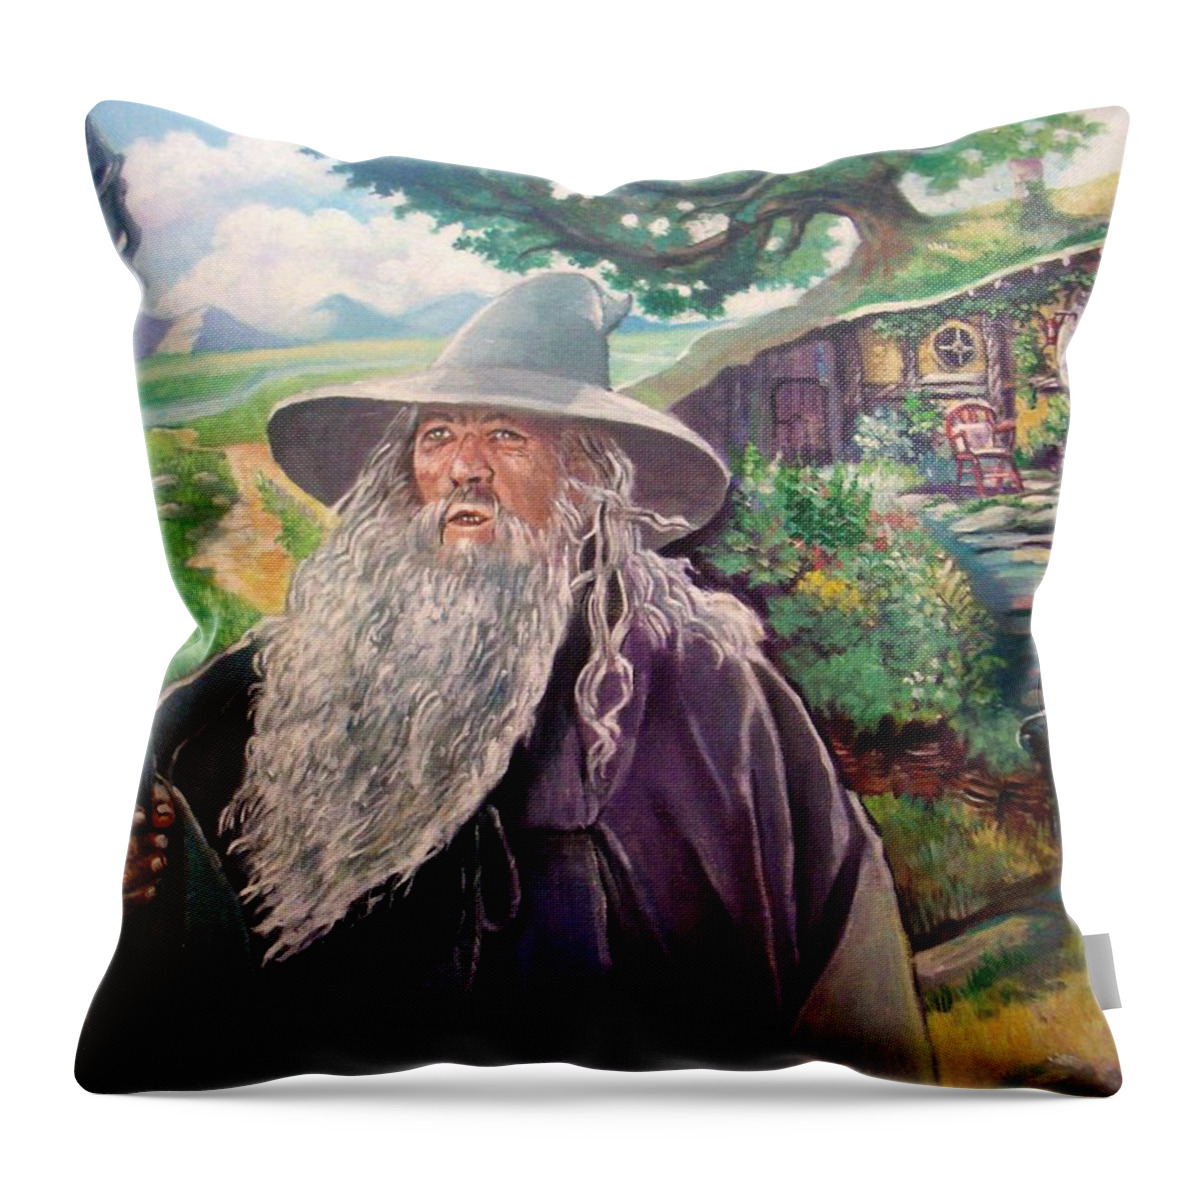 Hobbit Throw Pillow featuring the painting Hobbit by Paul Weerasekera